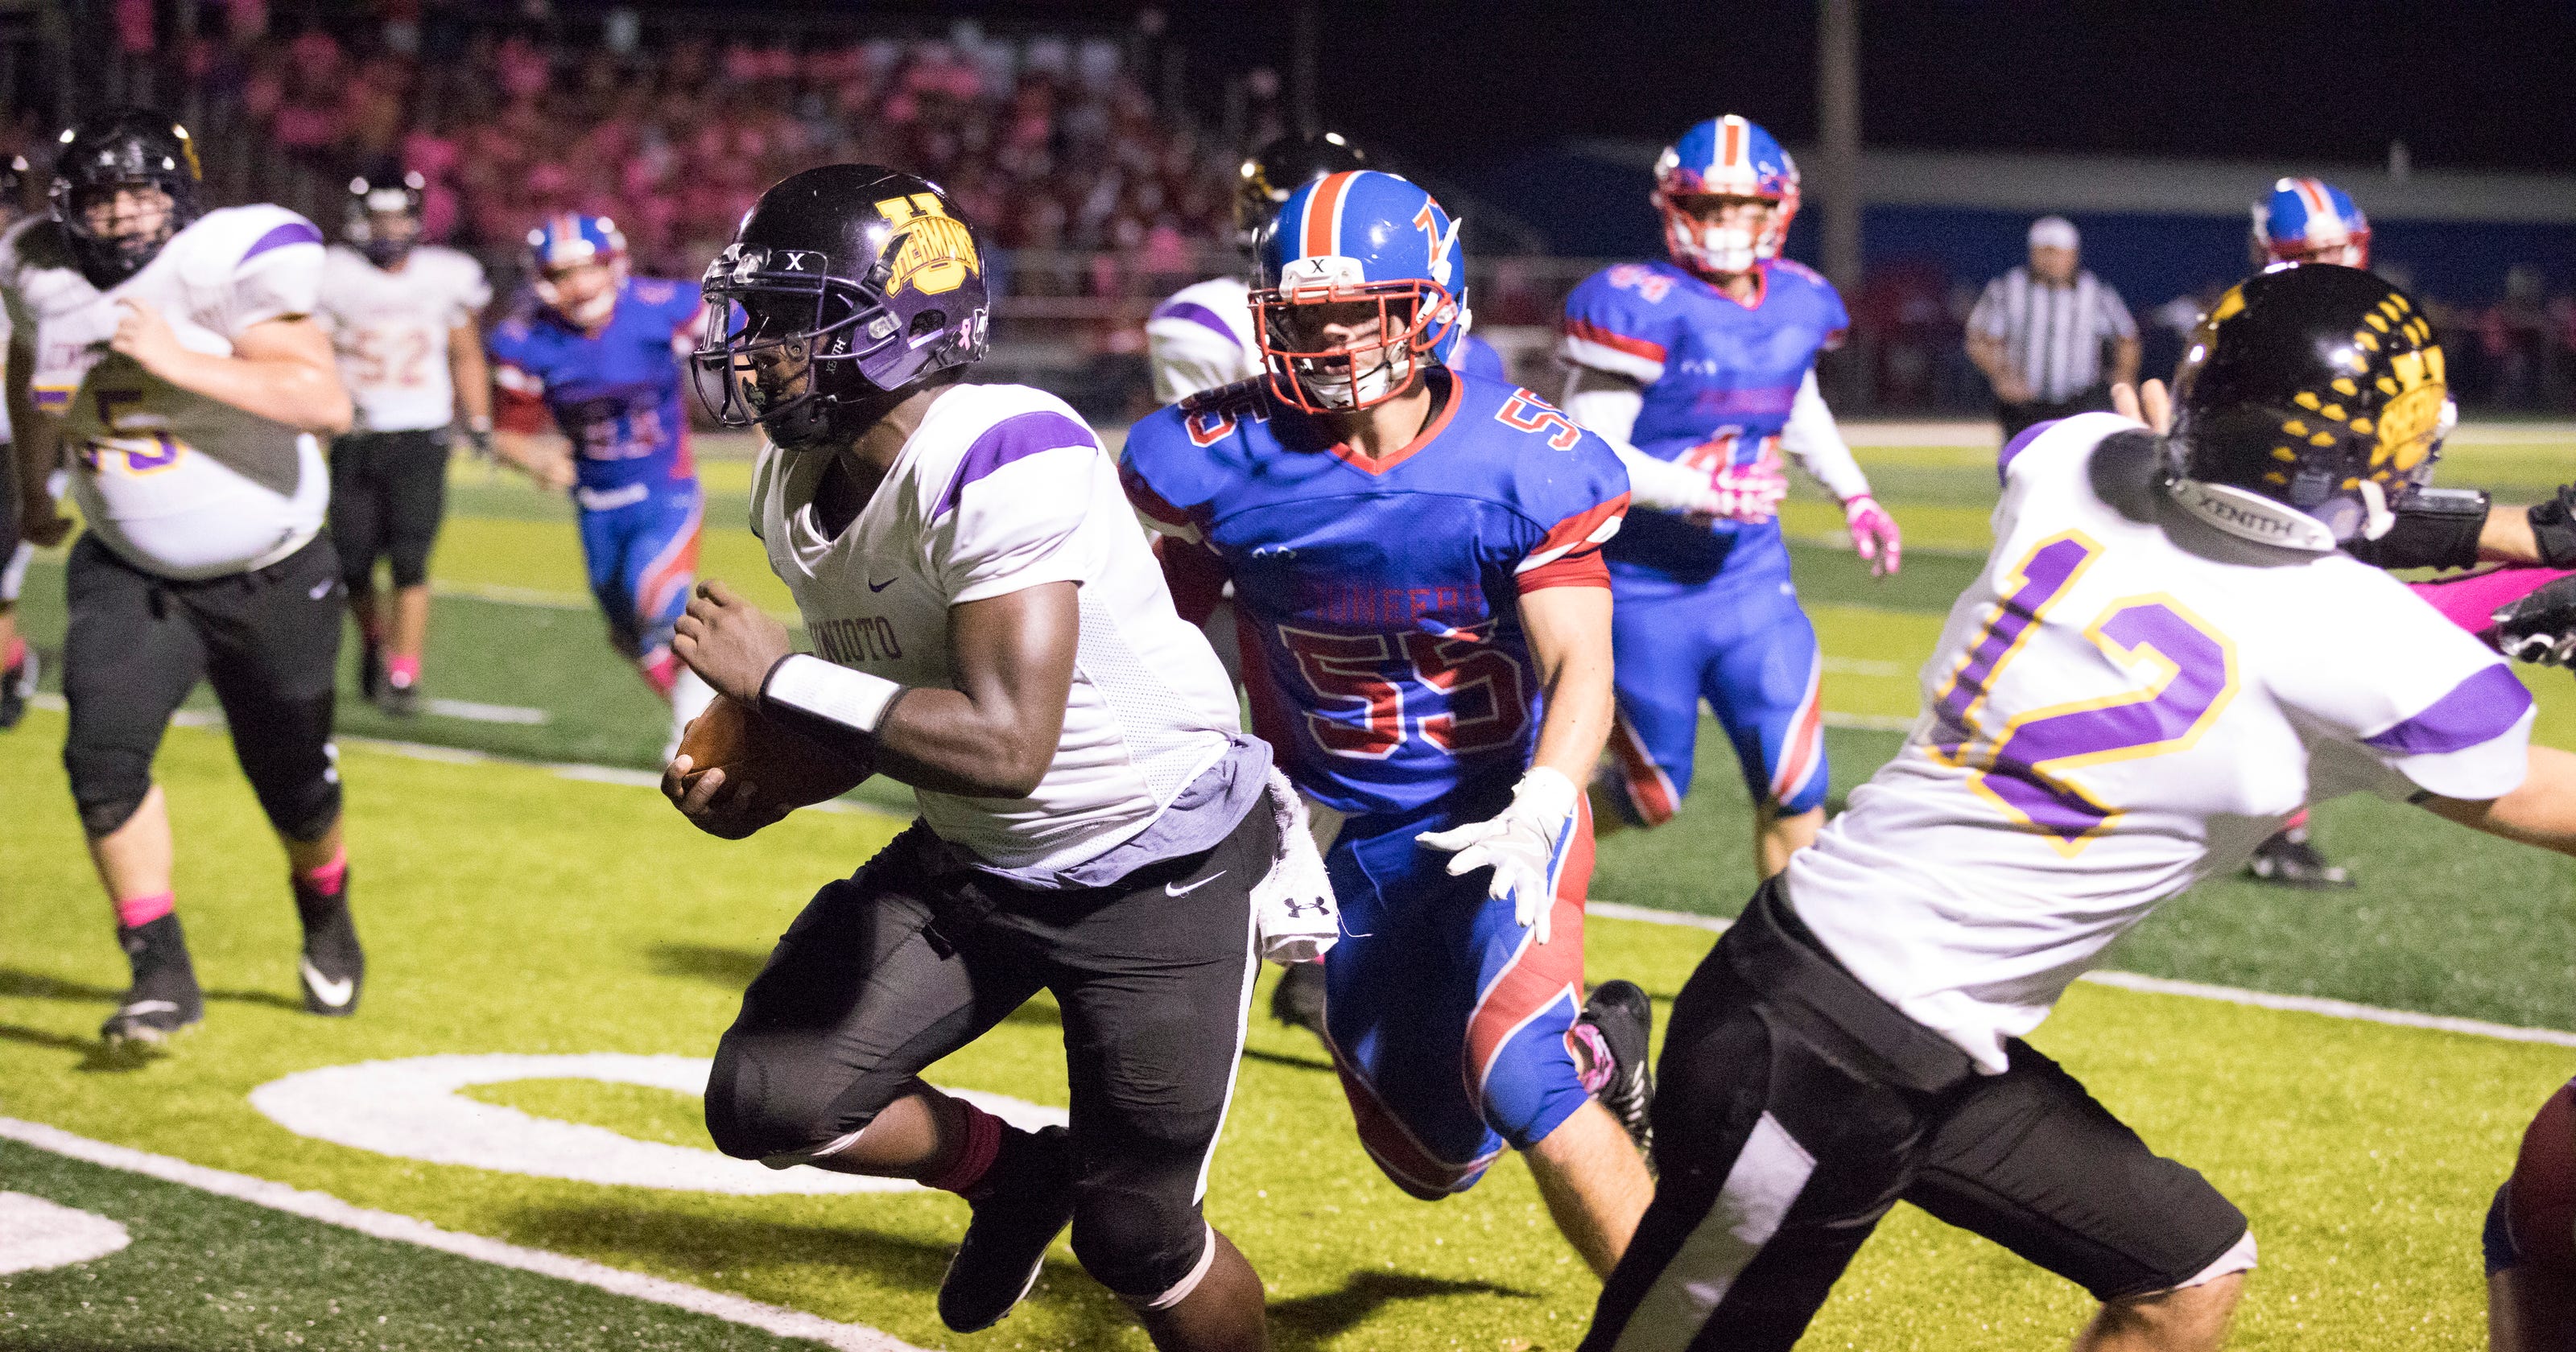 HS FOOTBALL Unioto Shermans defeat Zane Trace Pioneers 210